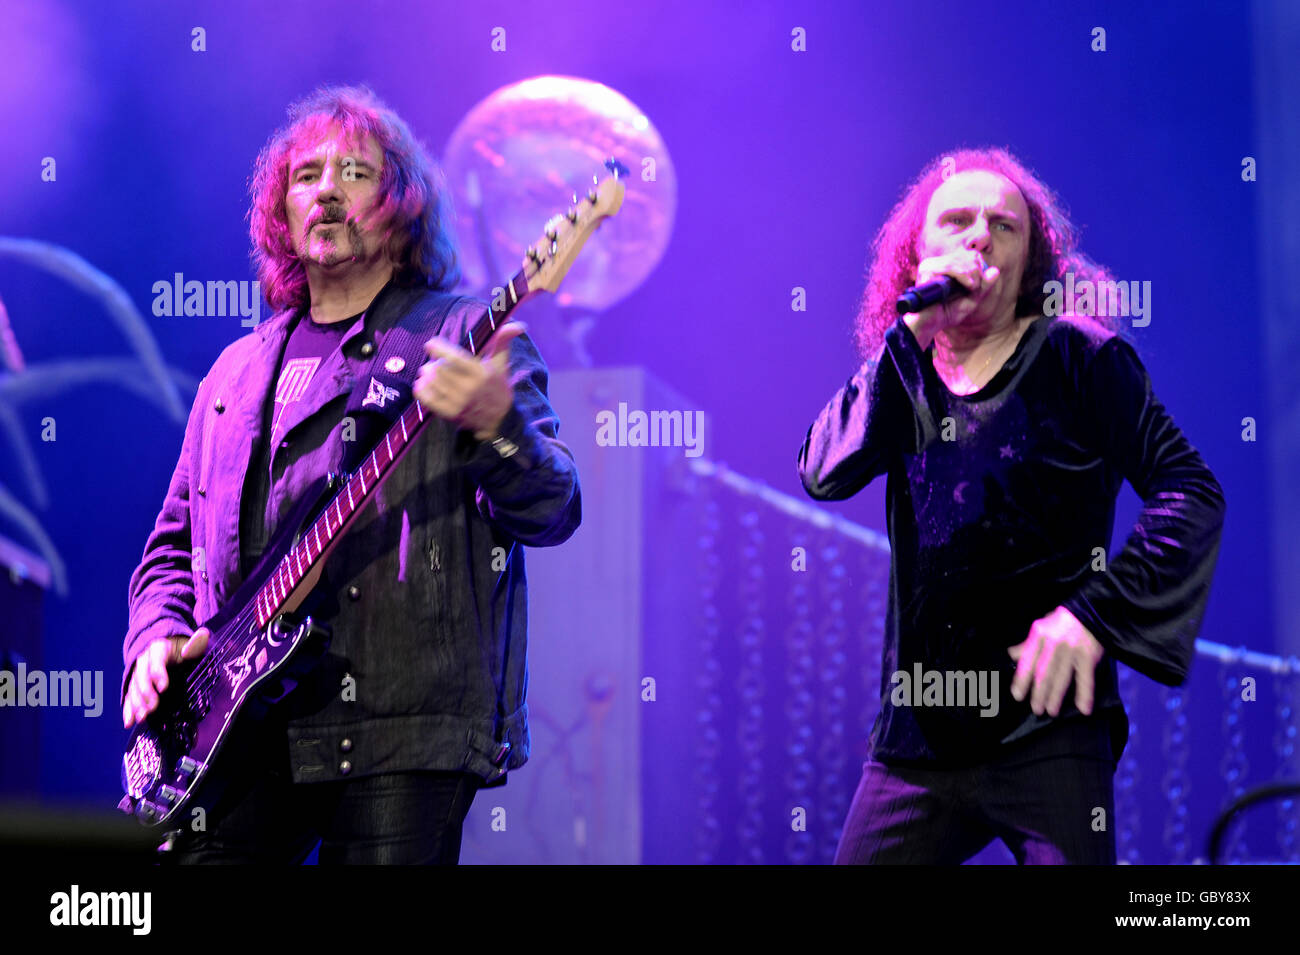 Geezer Butler and Ronnie James Dio of Heaven and Hell performs on stage on Day 1 of Sonisphere Festival at Knebworth. Stock Photo